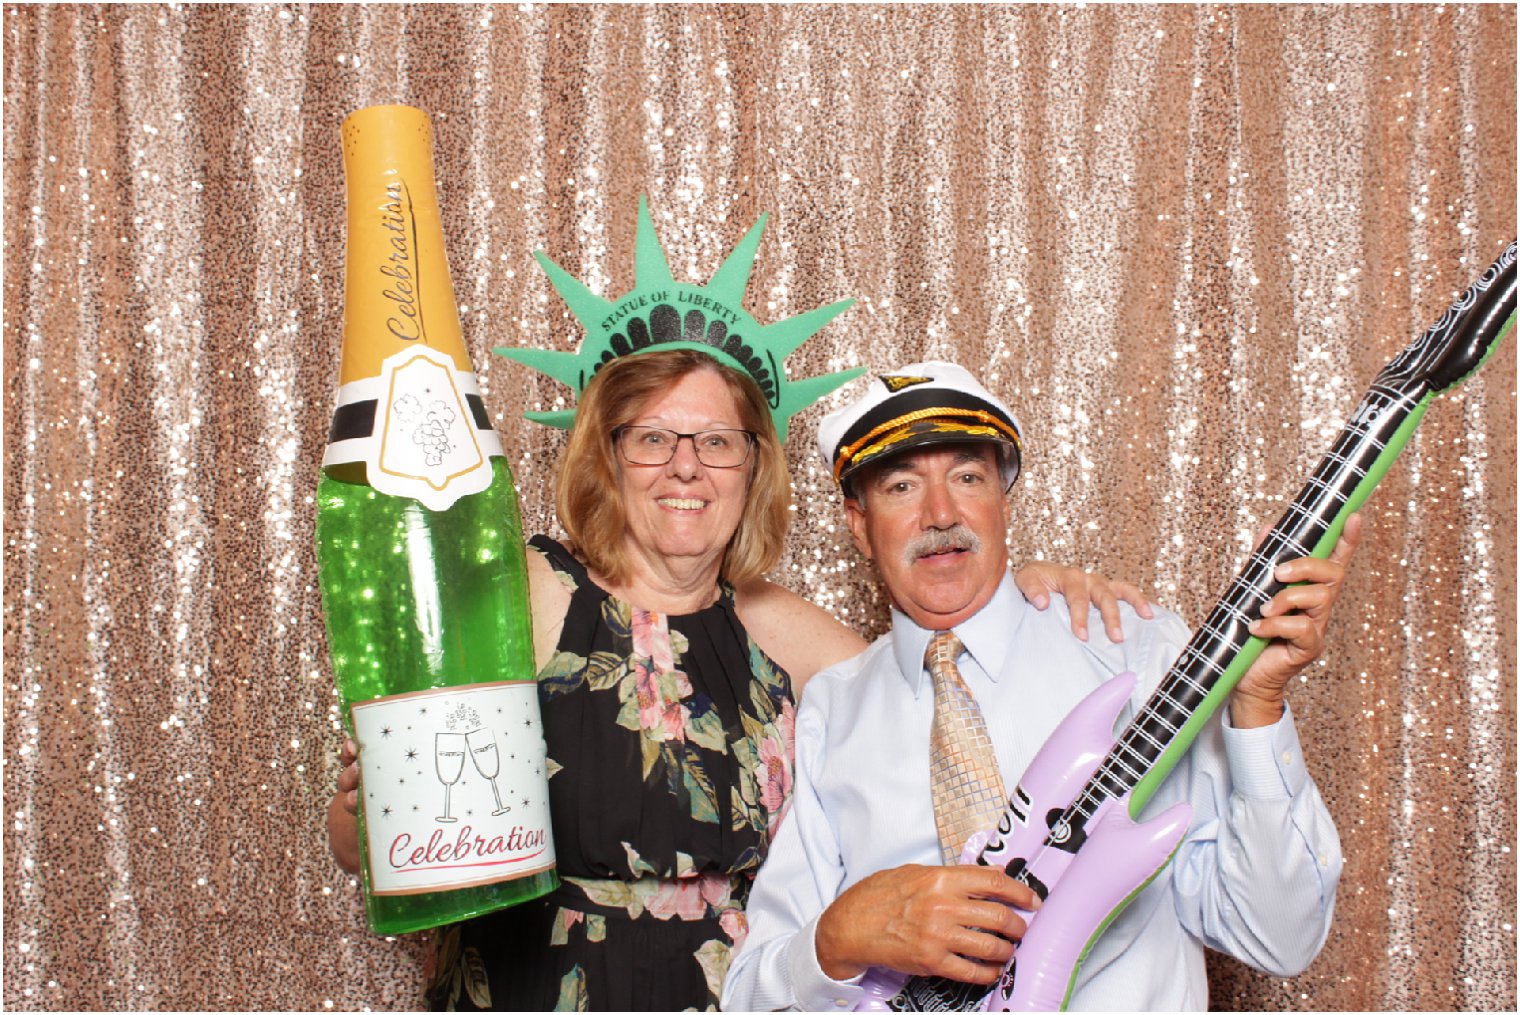 Photo booth with champagne bottle